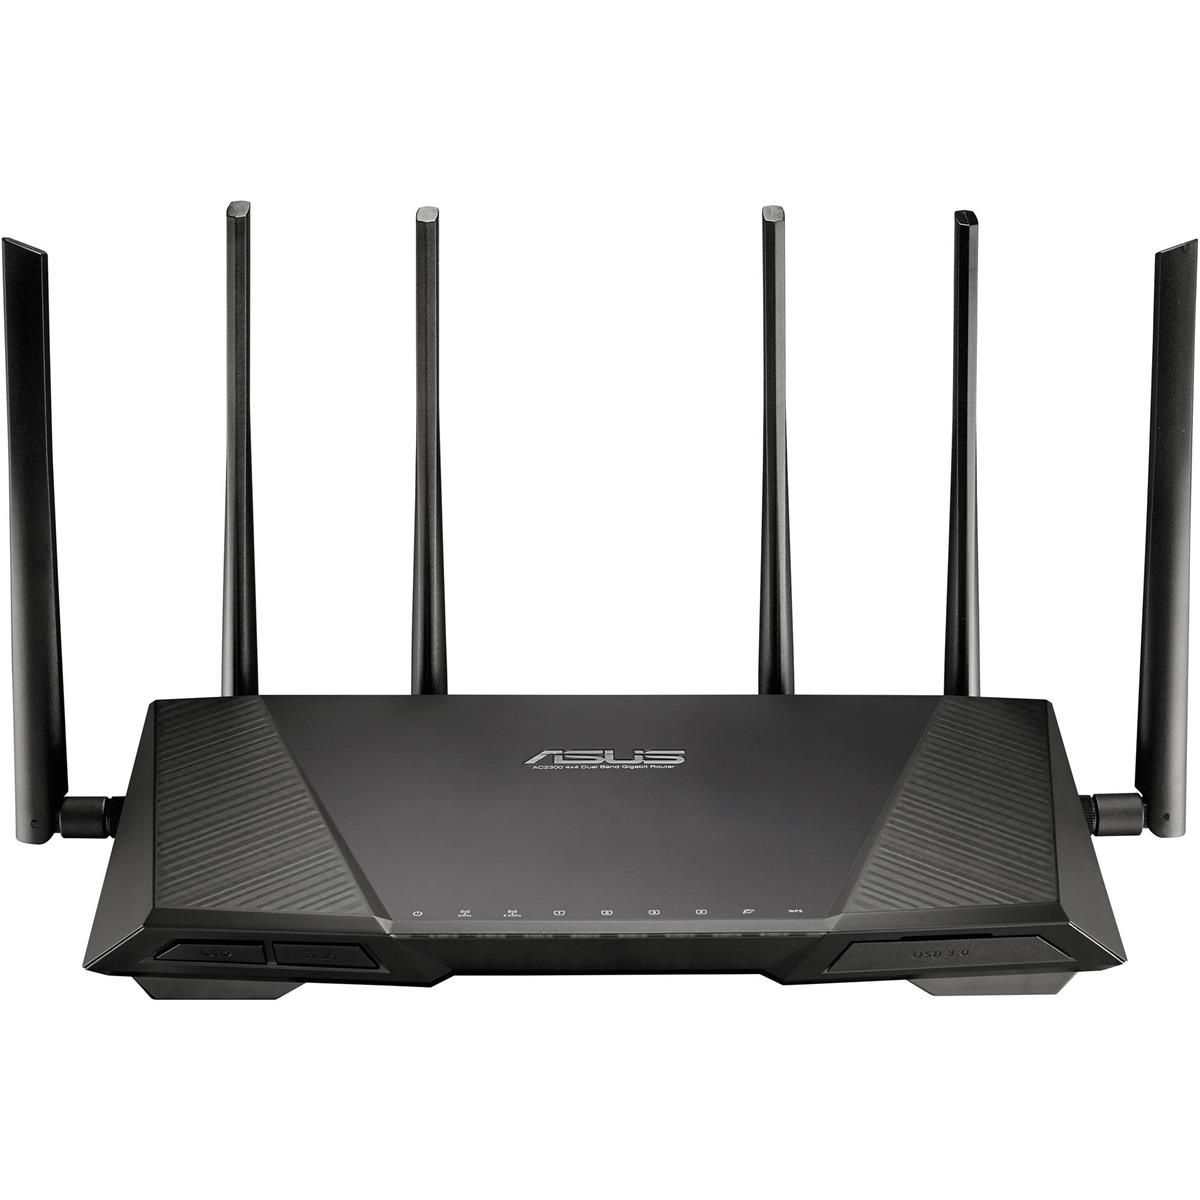 Asus RT-AC3200 Tri-Band Wi-Fi Wireless Ethernet Router